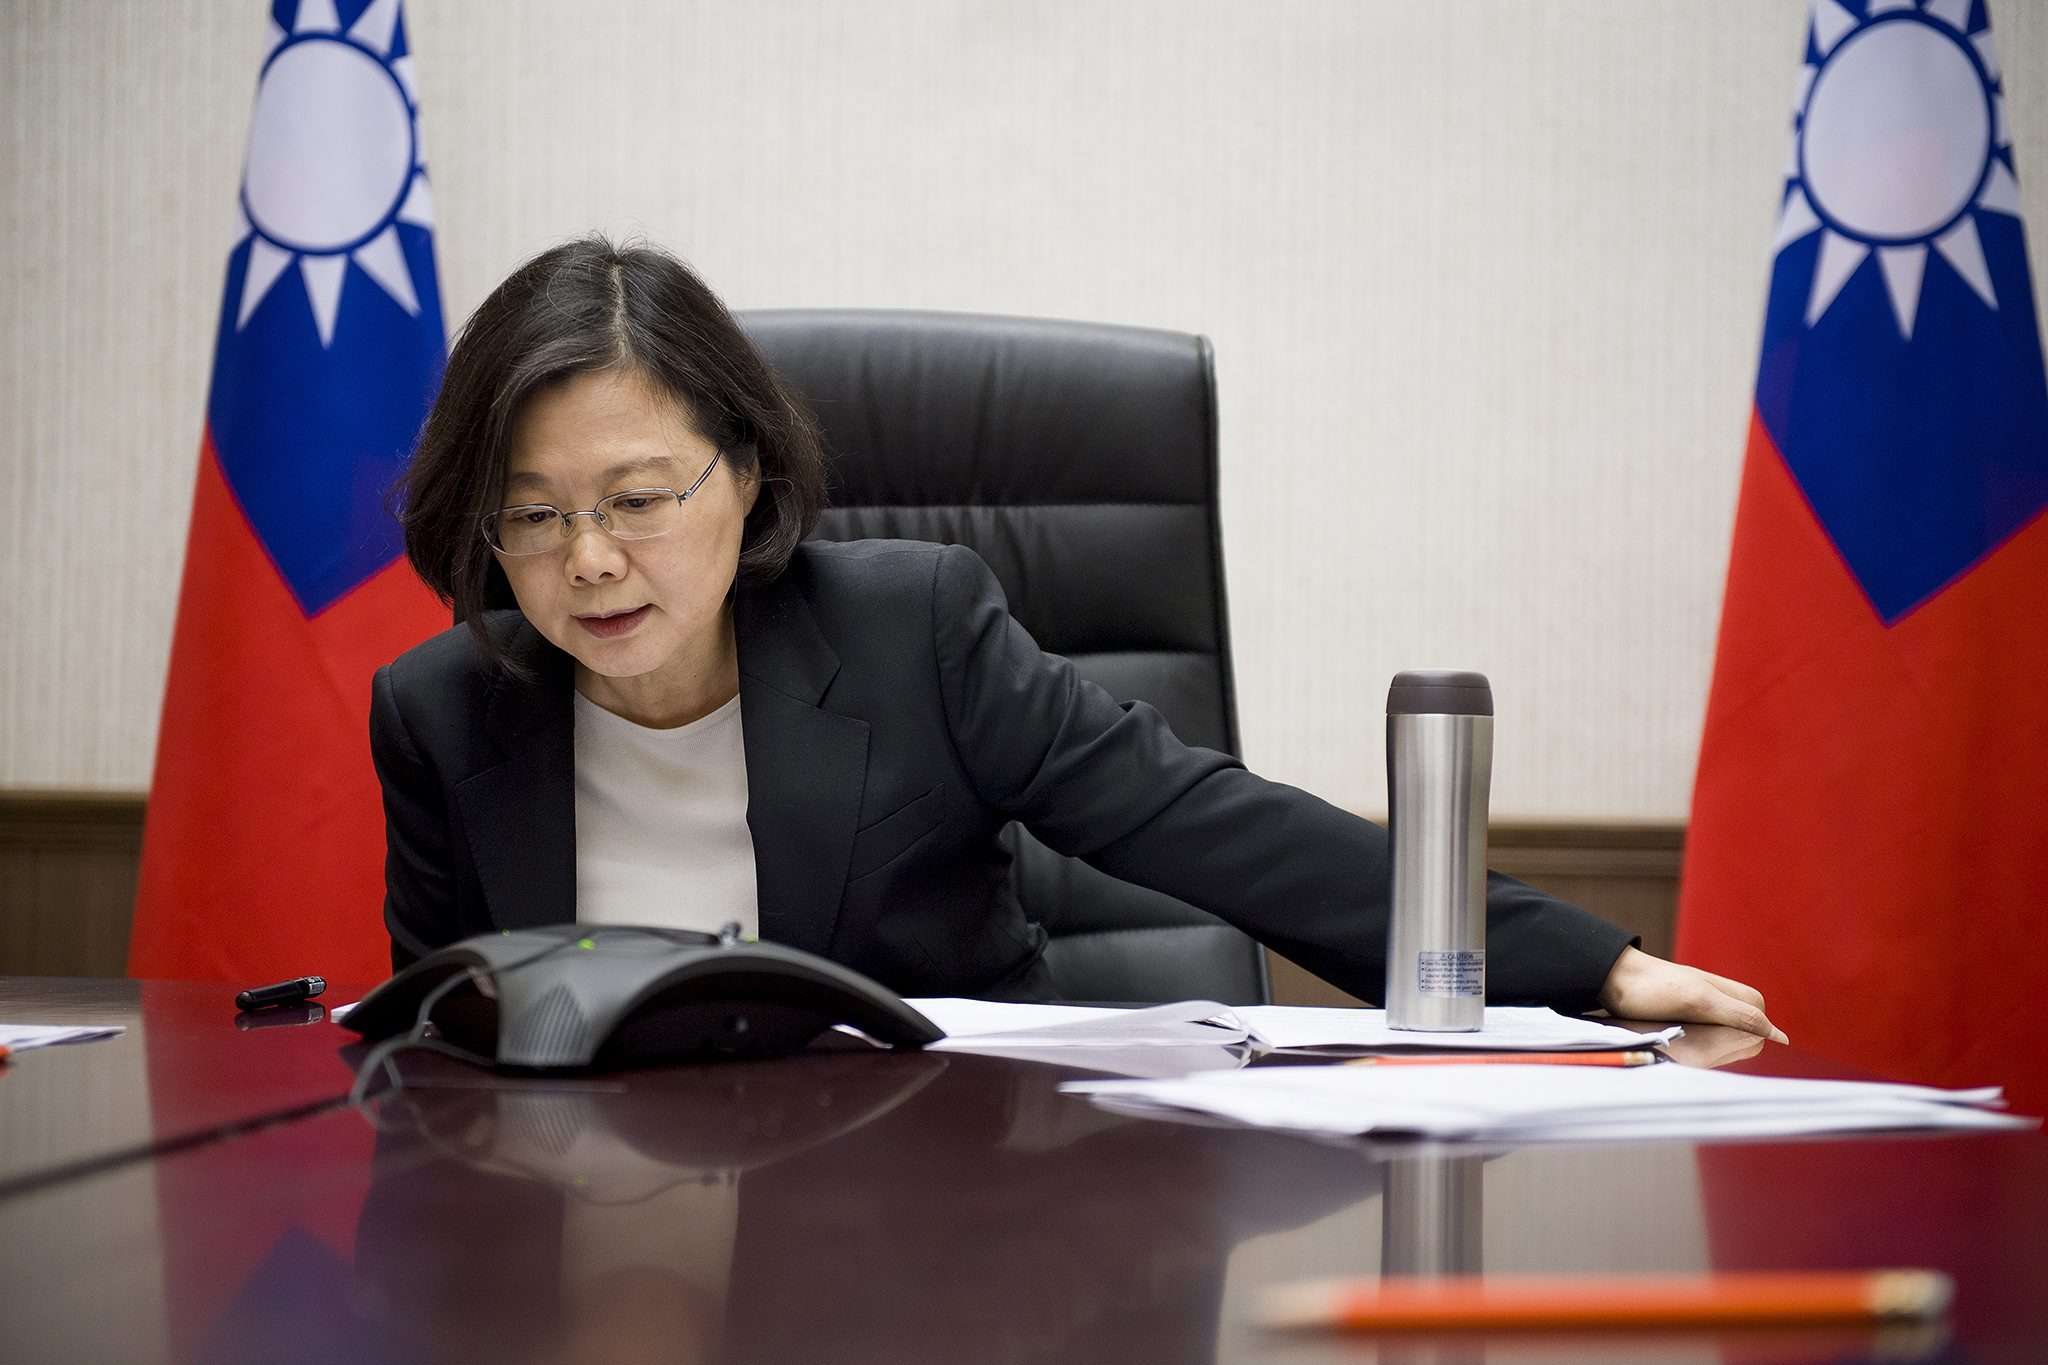 Taiwan’s President Tsai Ing-wen pictured in December speaking by phone with Donald Trump to congratulate him on his election victory. The call infuriated Beijing which discourages all contact by foreign governments with the leader’s of Taiwan, which it considers a breakaway Chinese province. Photo: EPA